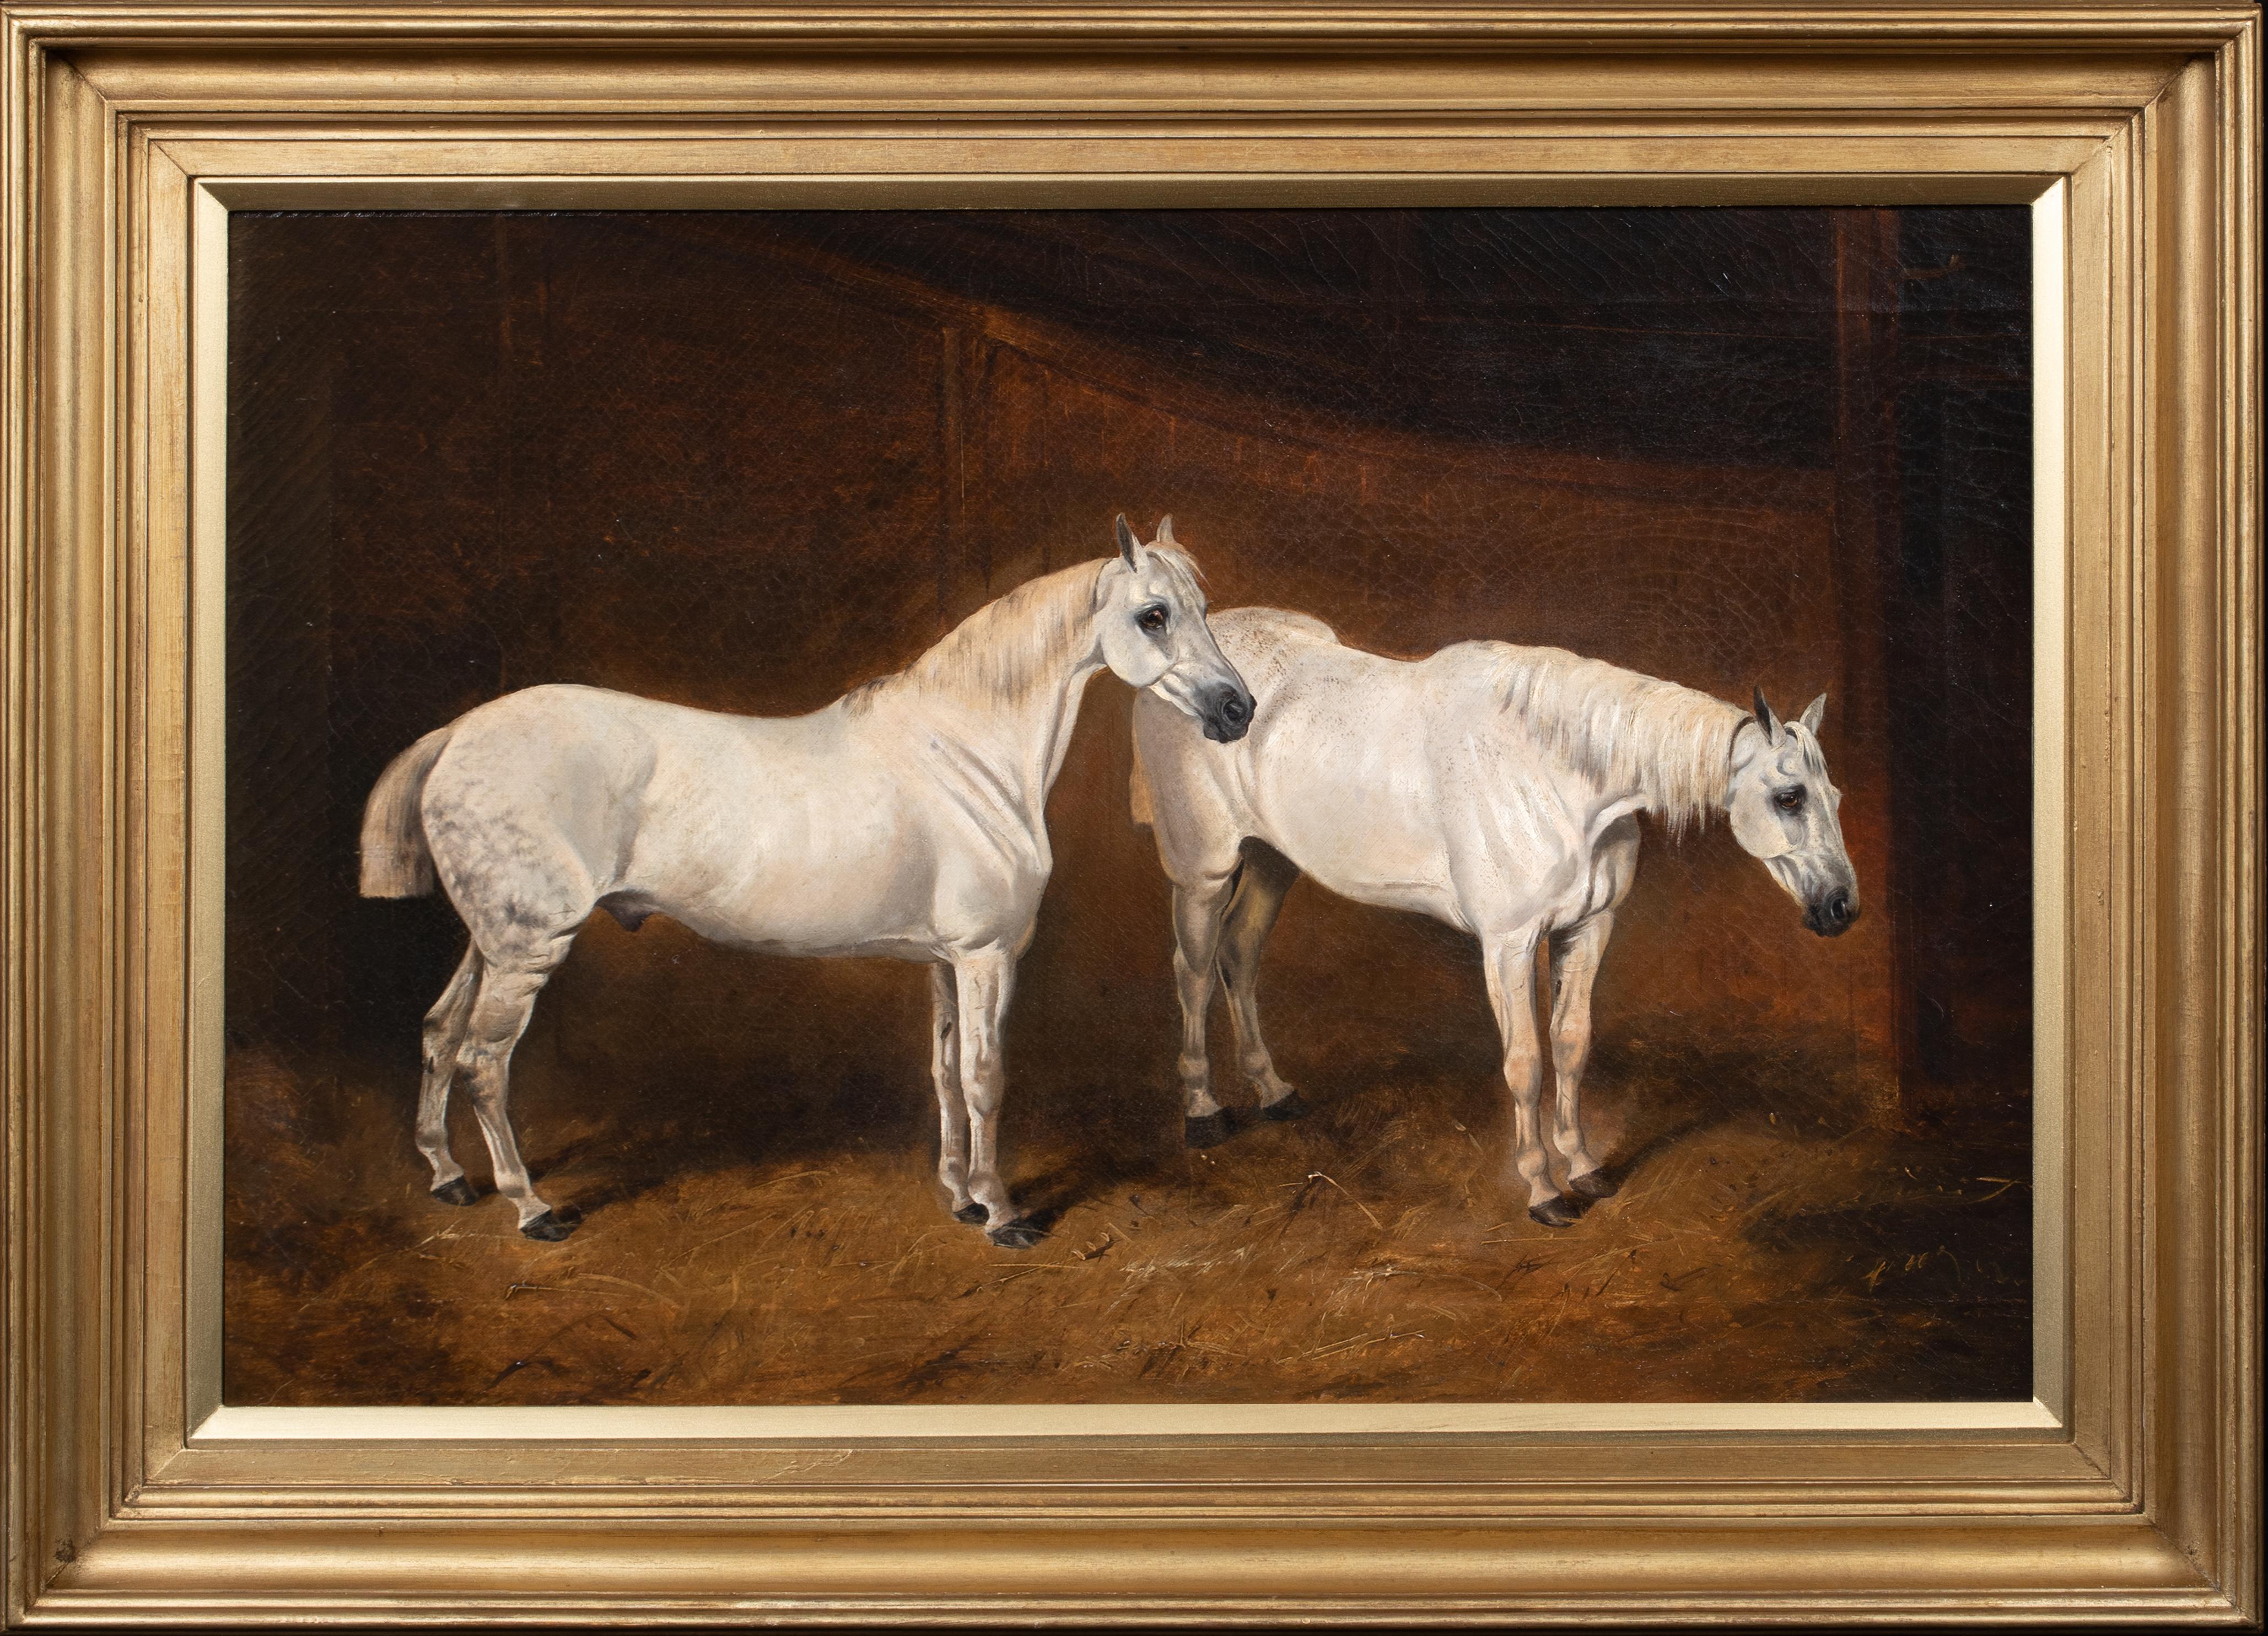 William Barraud Portrait Painting - Two White Horses In A Stable, 19th Century